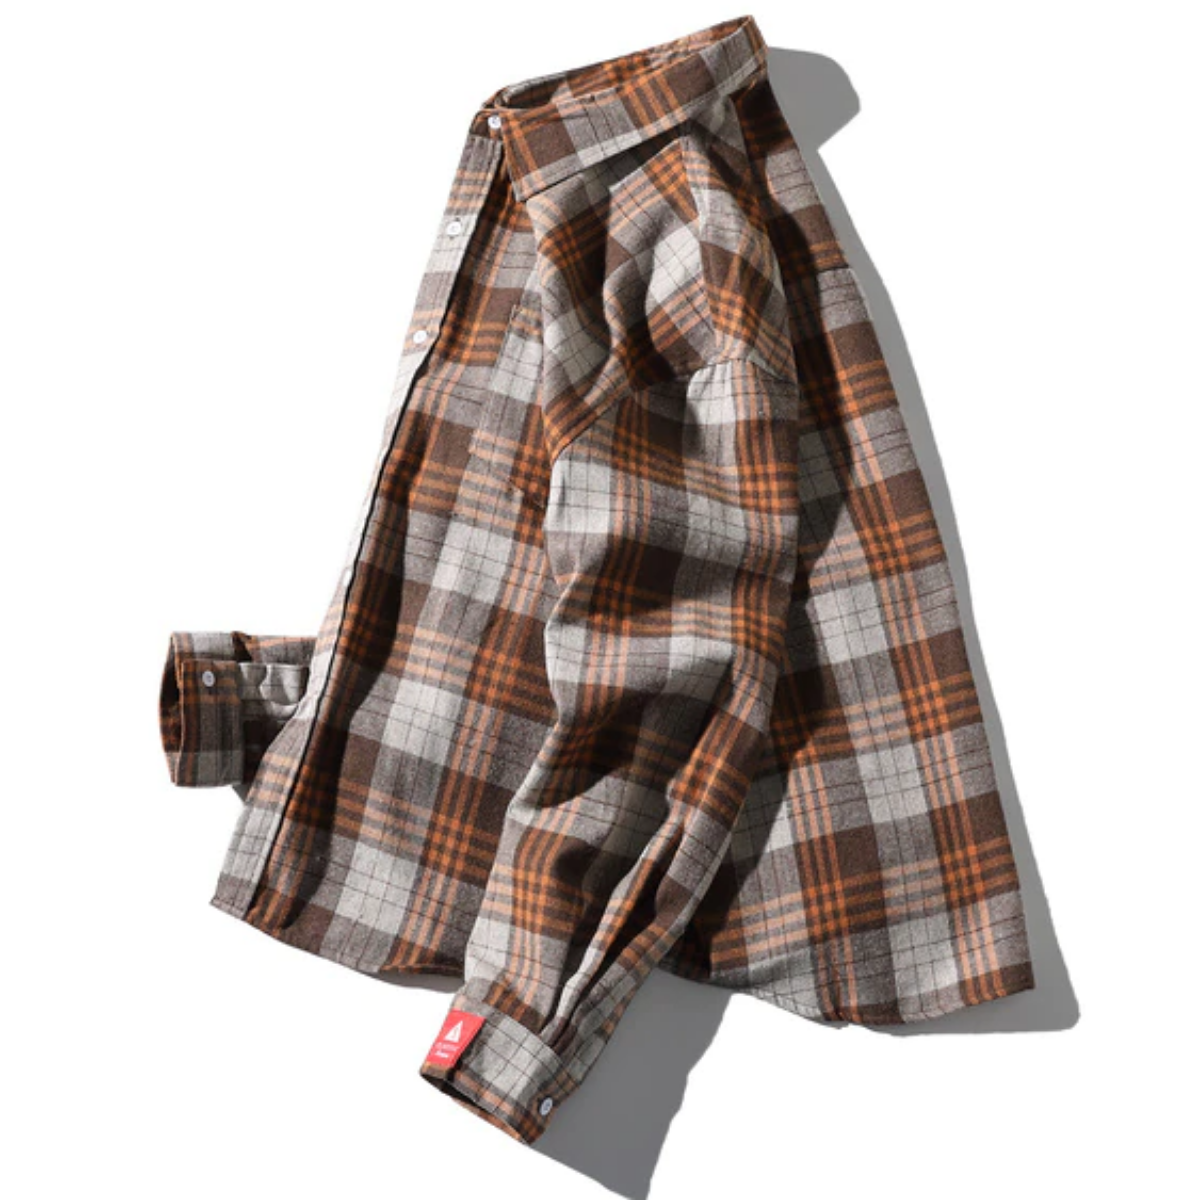 A long-sleeve, button-up Men's Classic Plaid Flannel Shirt, Yellow in shades of brown, orange, and gray lies flat against a white background. This American Legend Ride flannel is extra thick and cozy, perfect for chilly days.